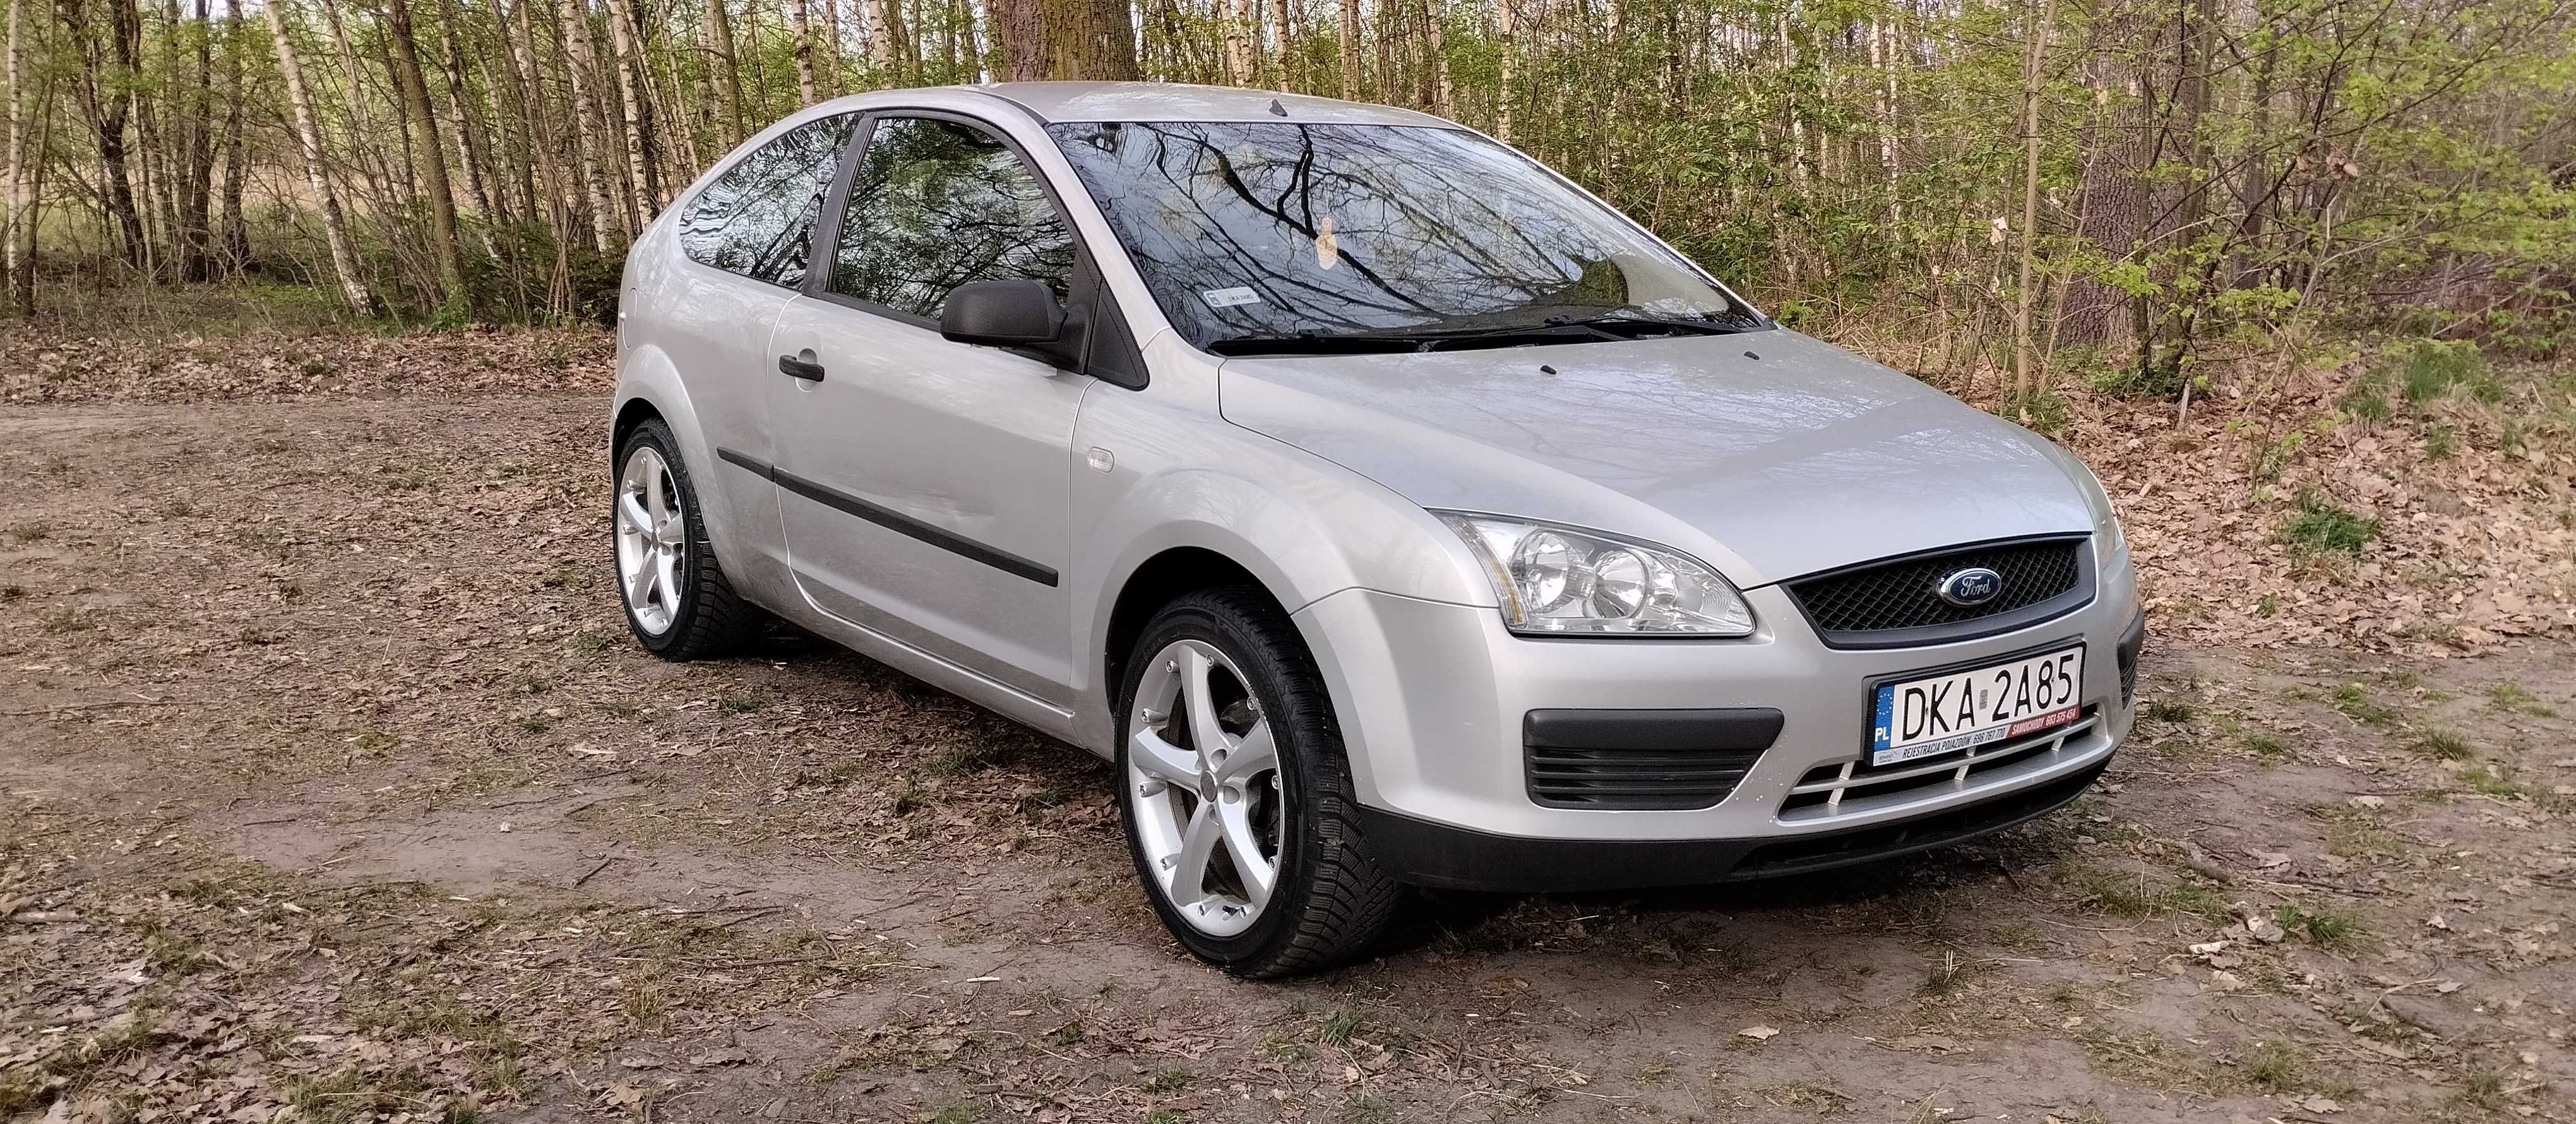 Ford Focus MK2 1.6 benzyna